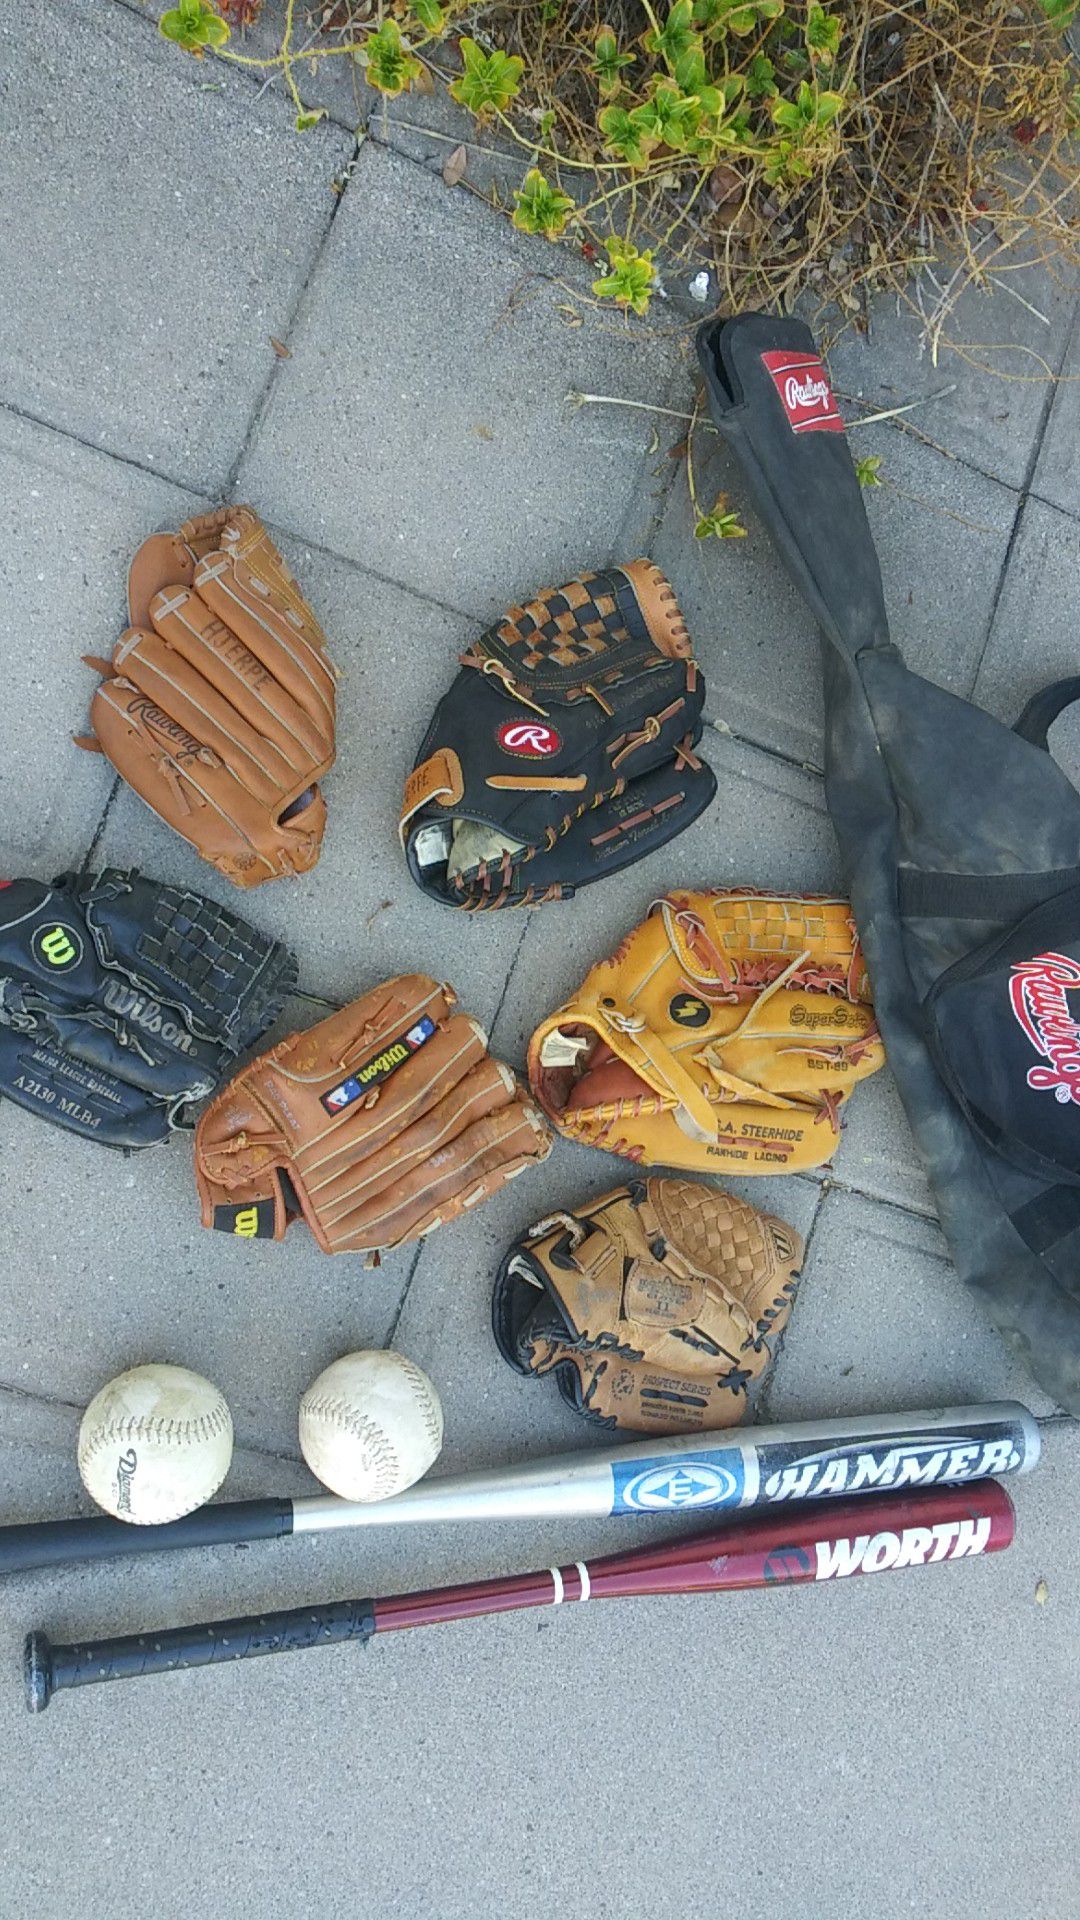 4 Kid's Gloves and 1 adult glove, 2 Bats,2 softballs and 1 Rawlings bag. $25 for all of it.